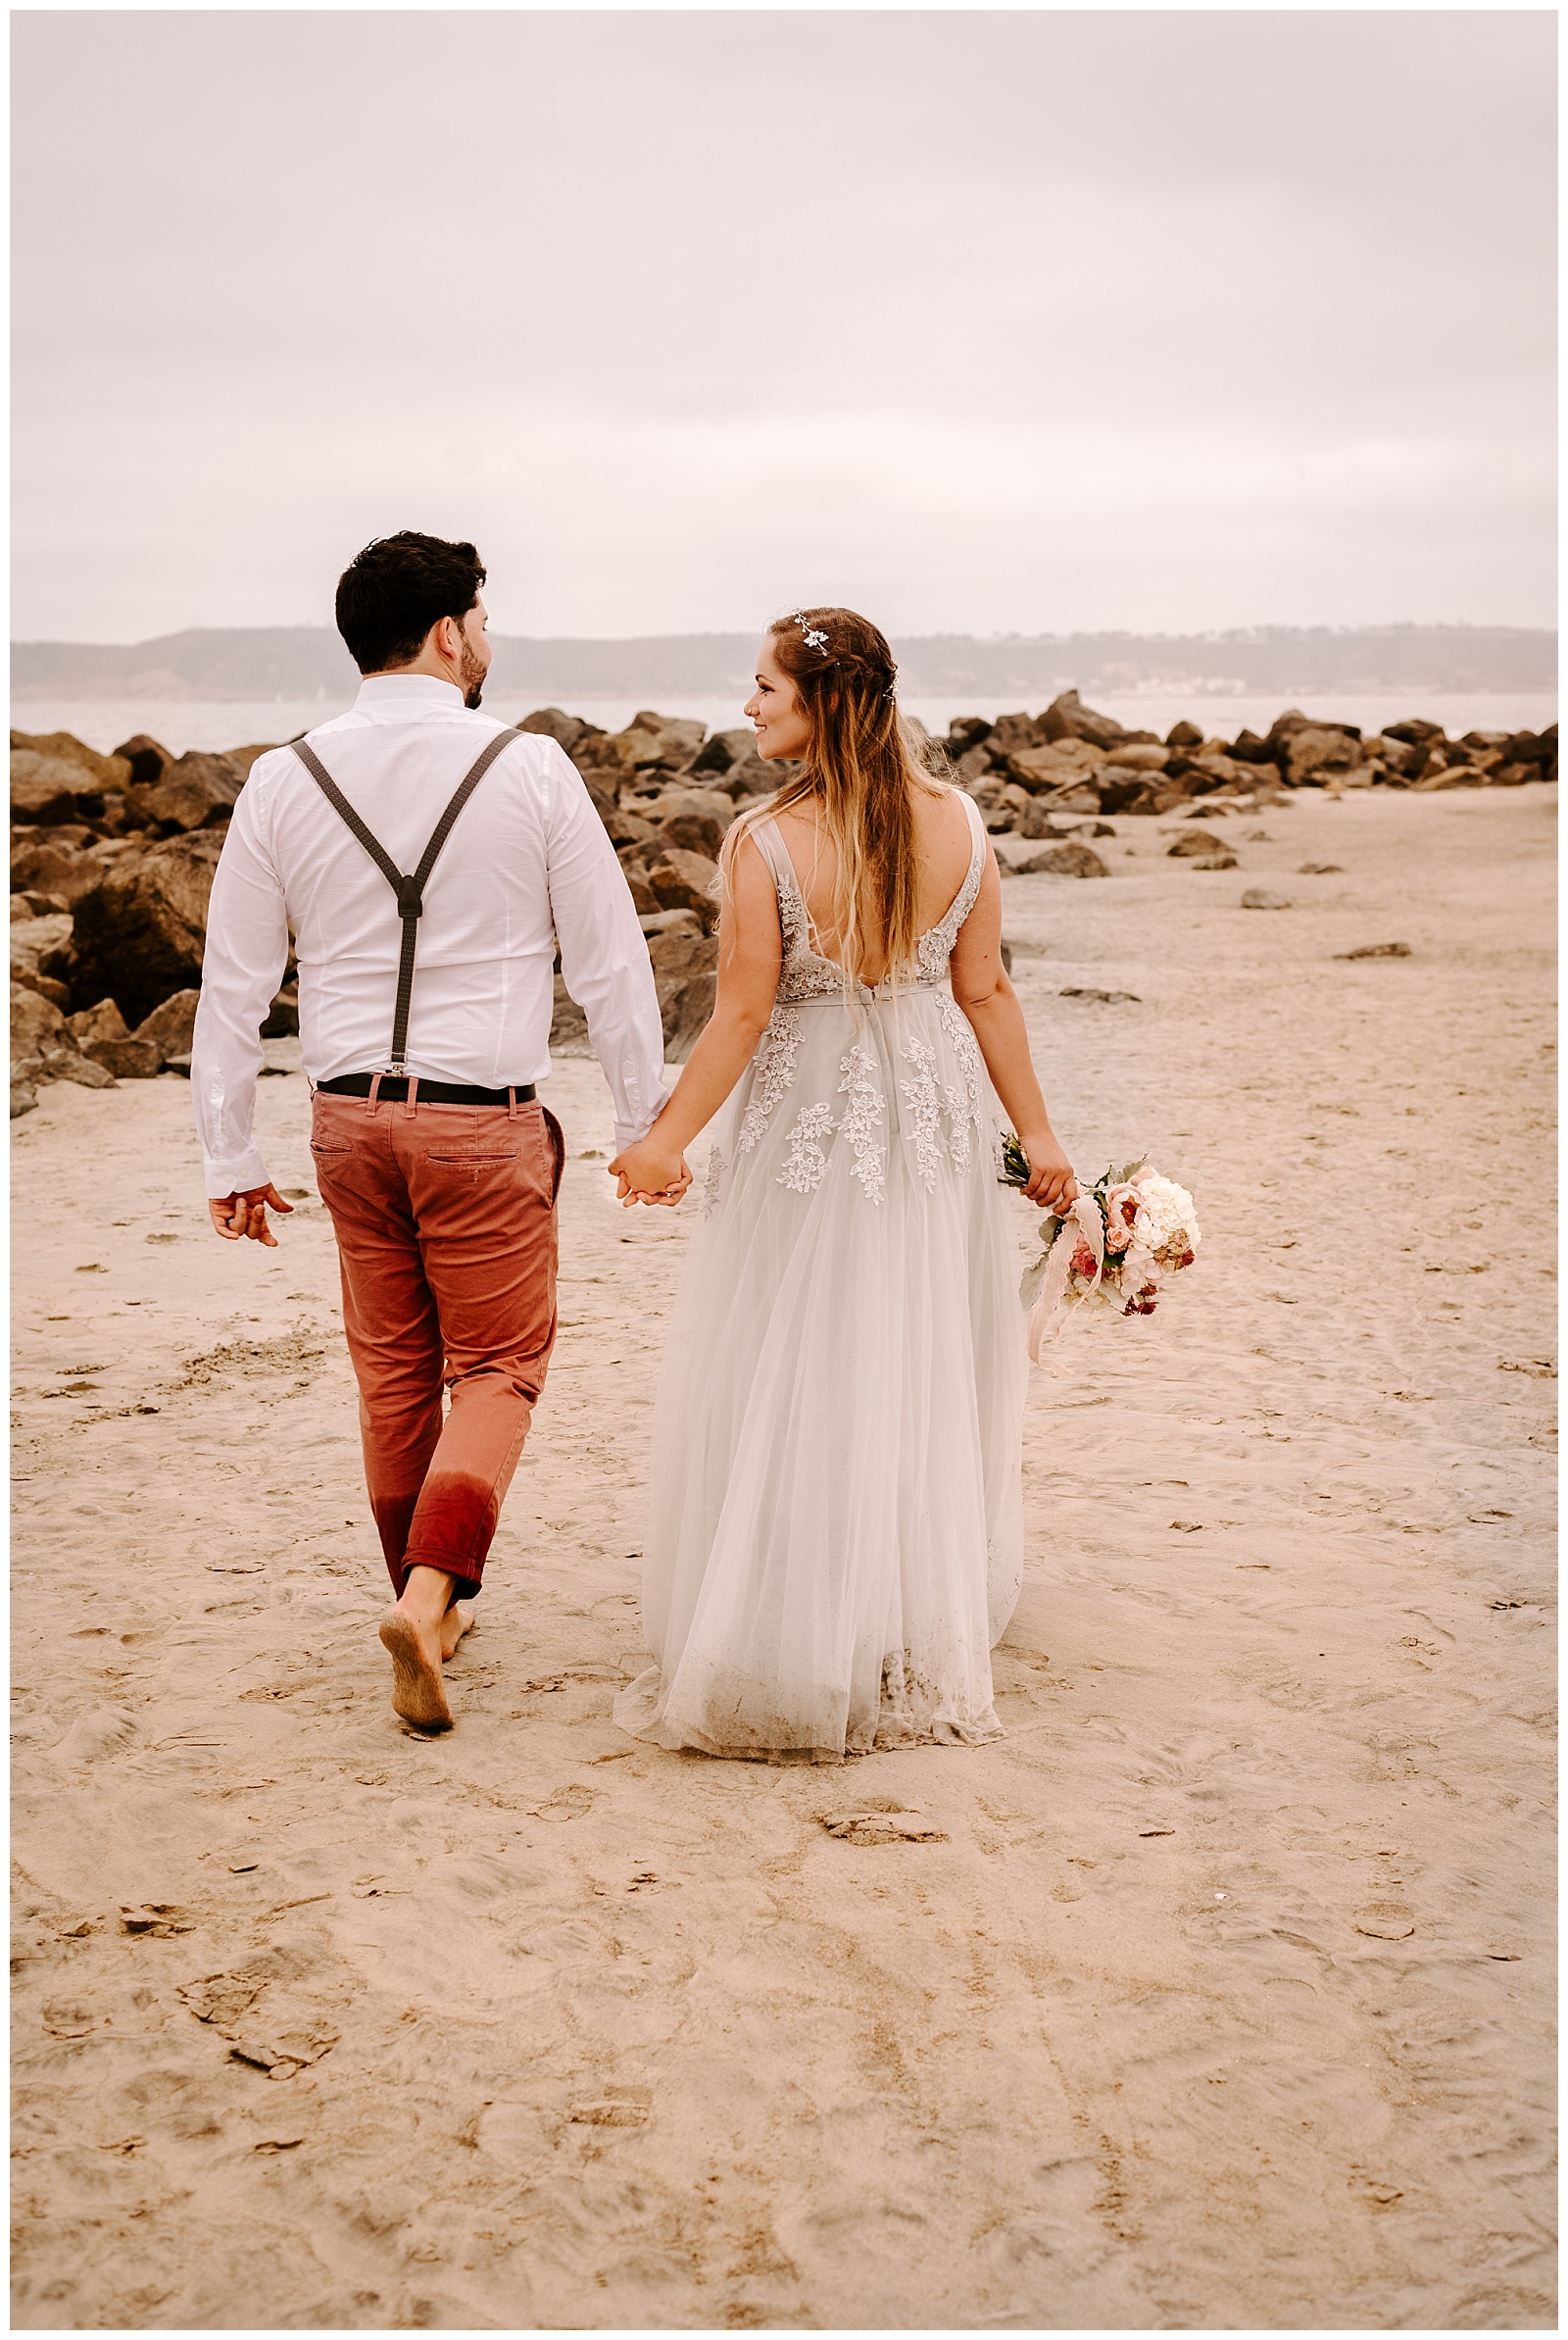 Places to elope in Southern California